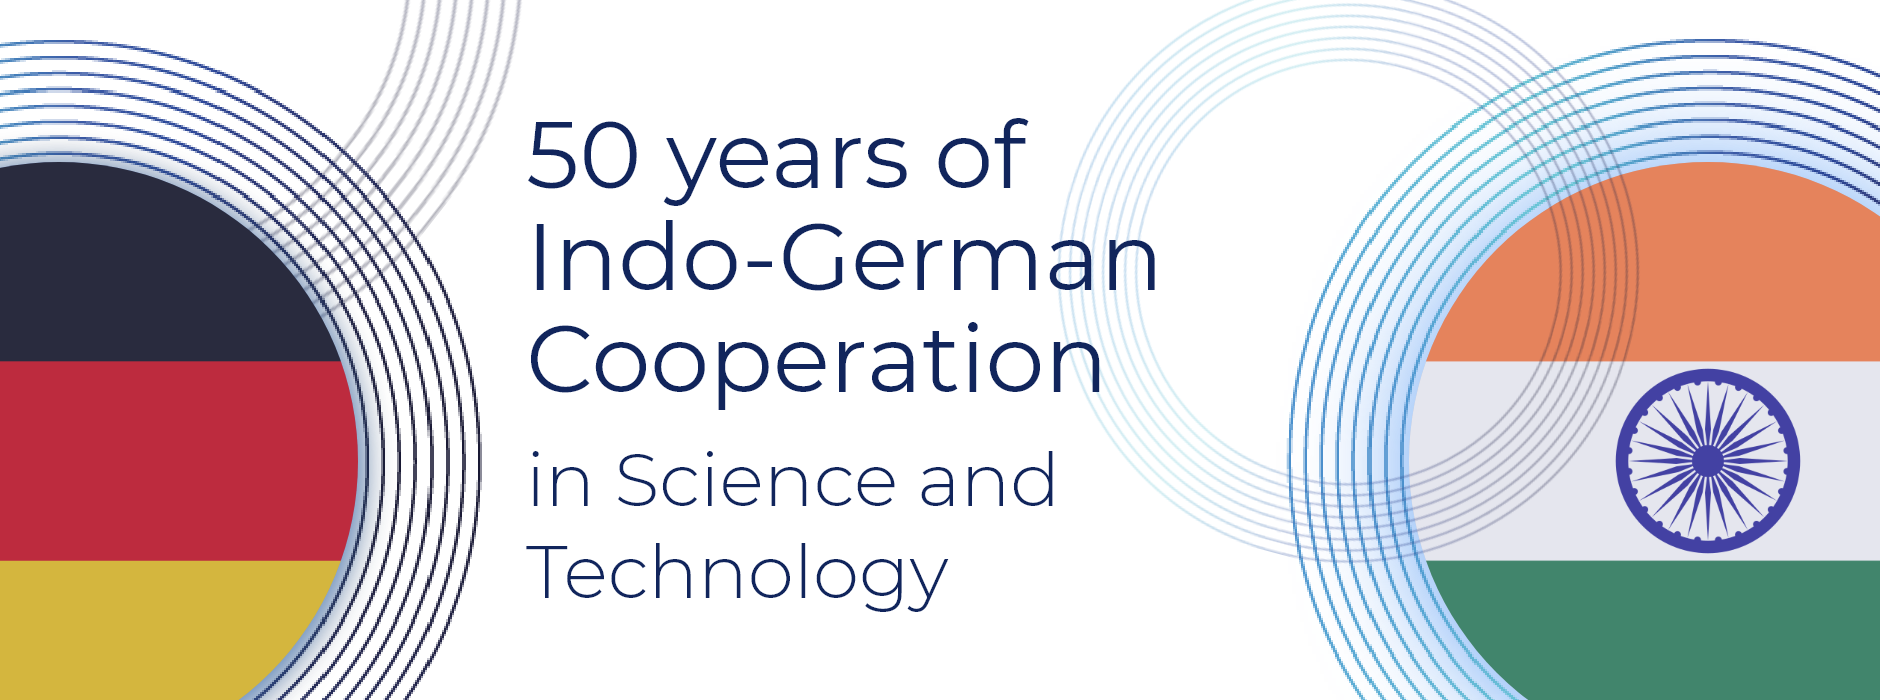 50 years of Indo-German Cooperation in Science and Technologie